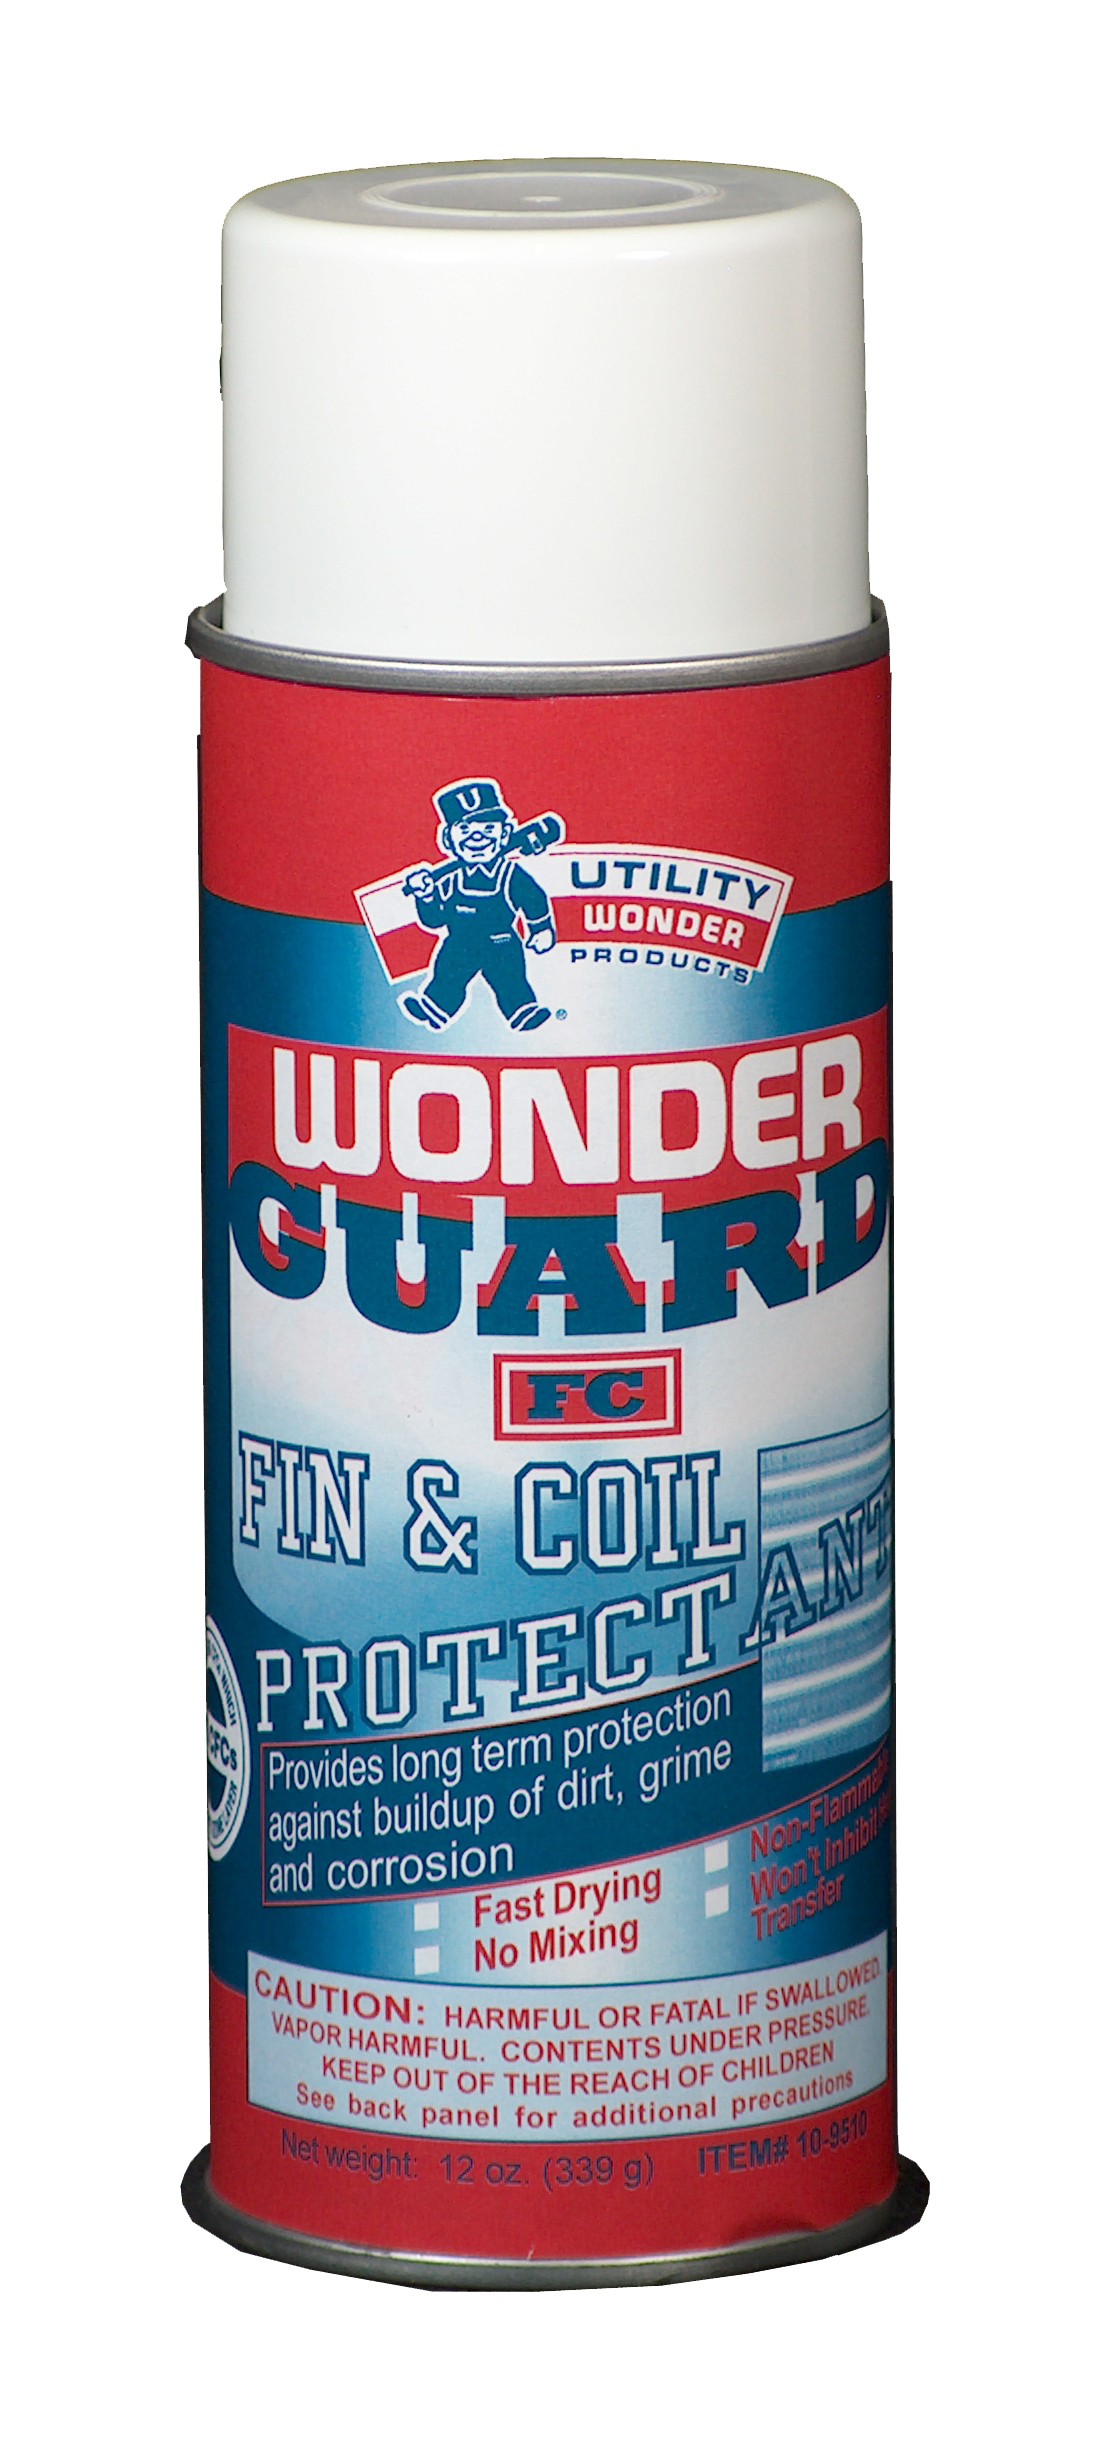 WONDER GUARD FC FIN & COIL PROTECTANT SPRAY